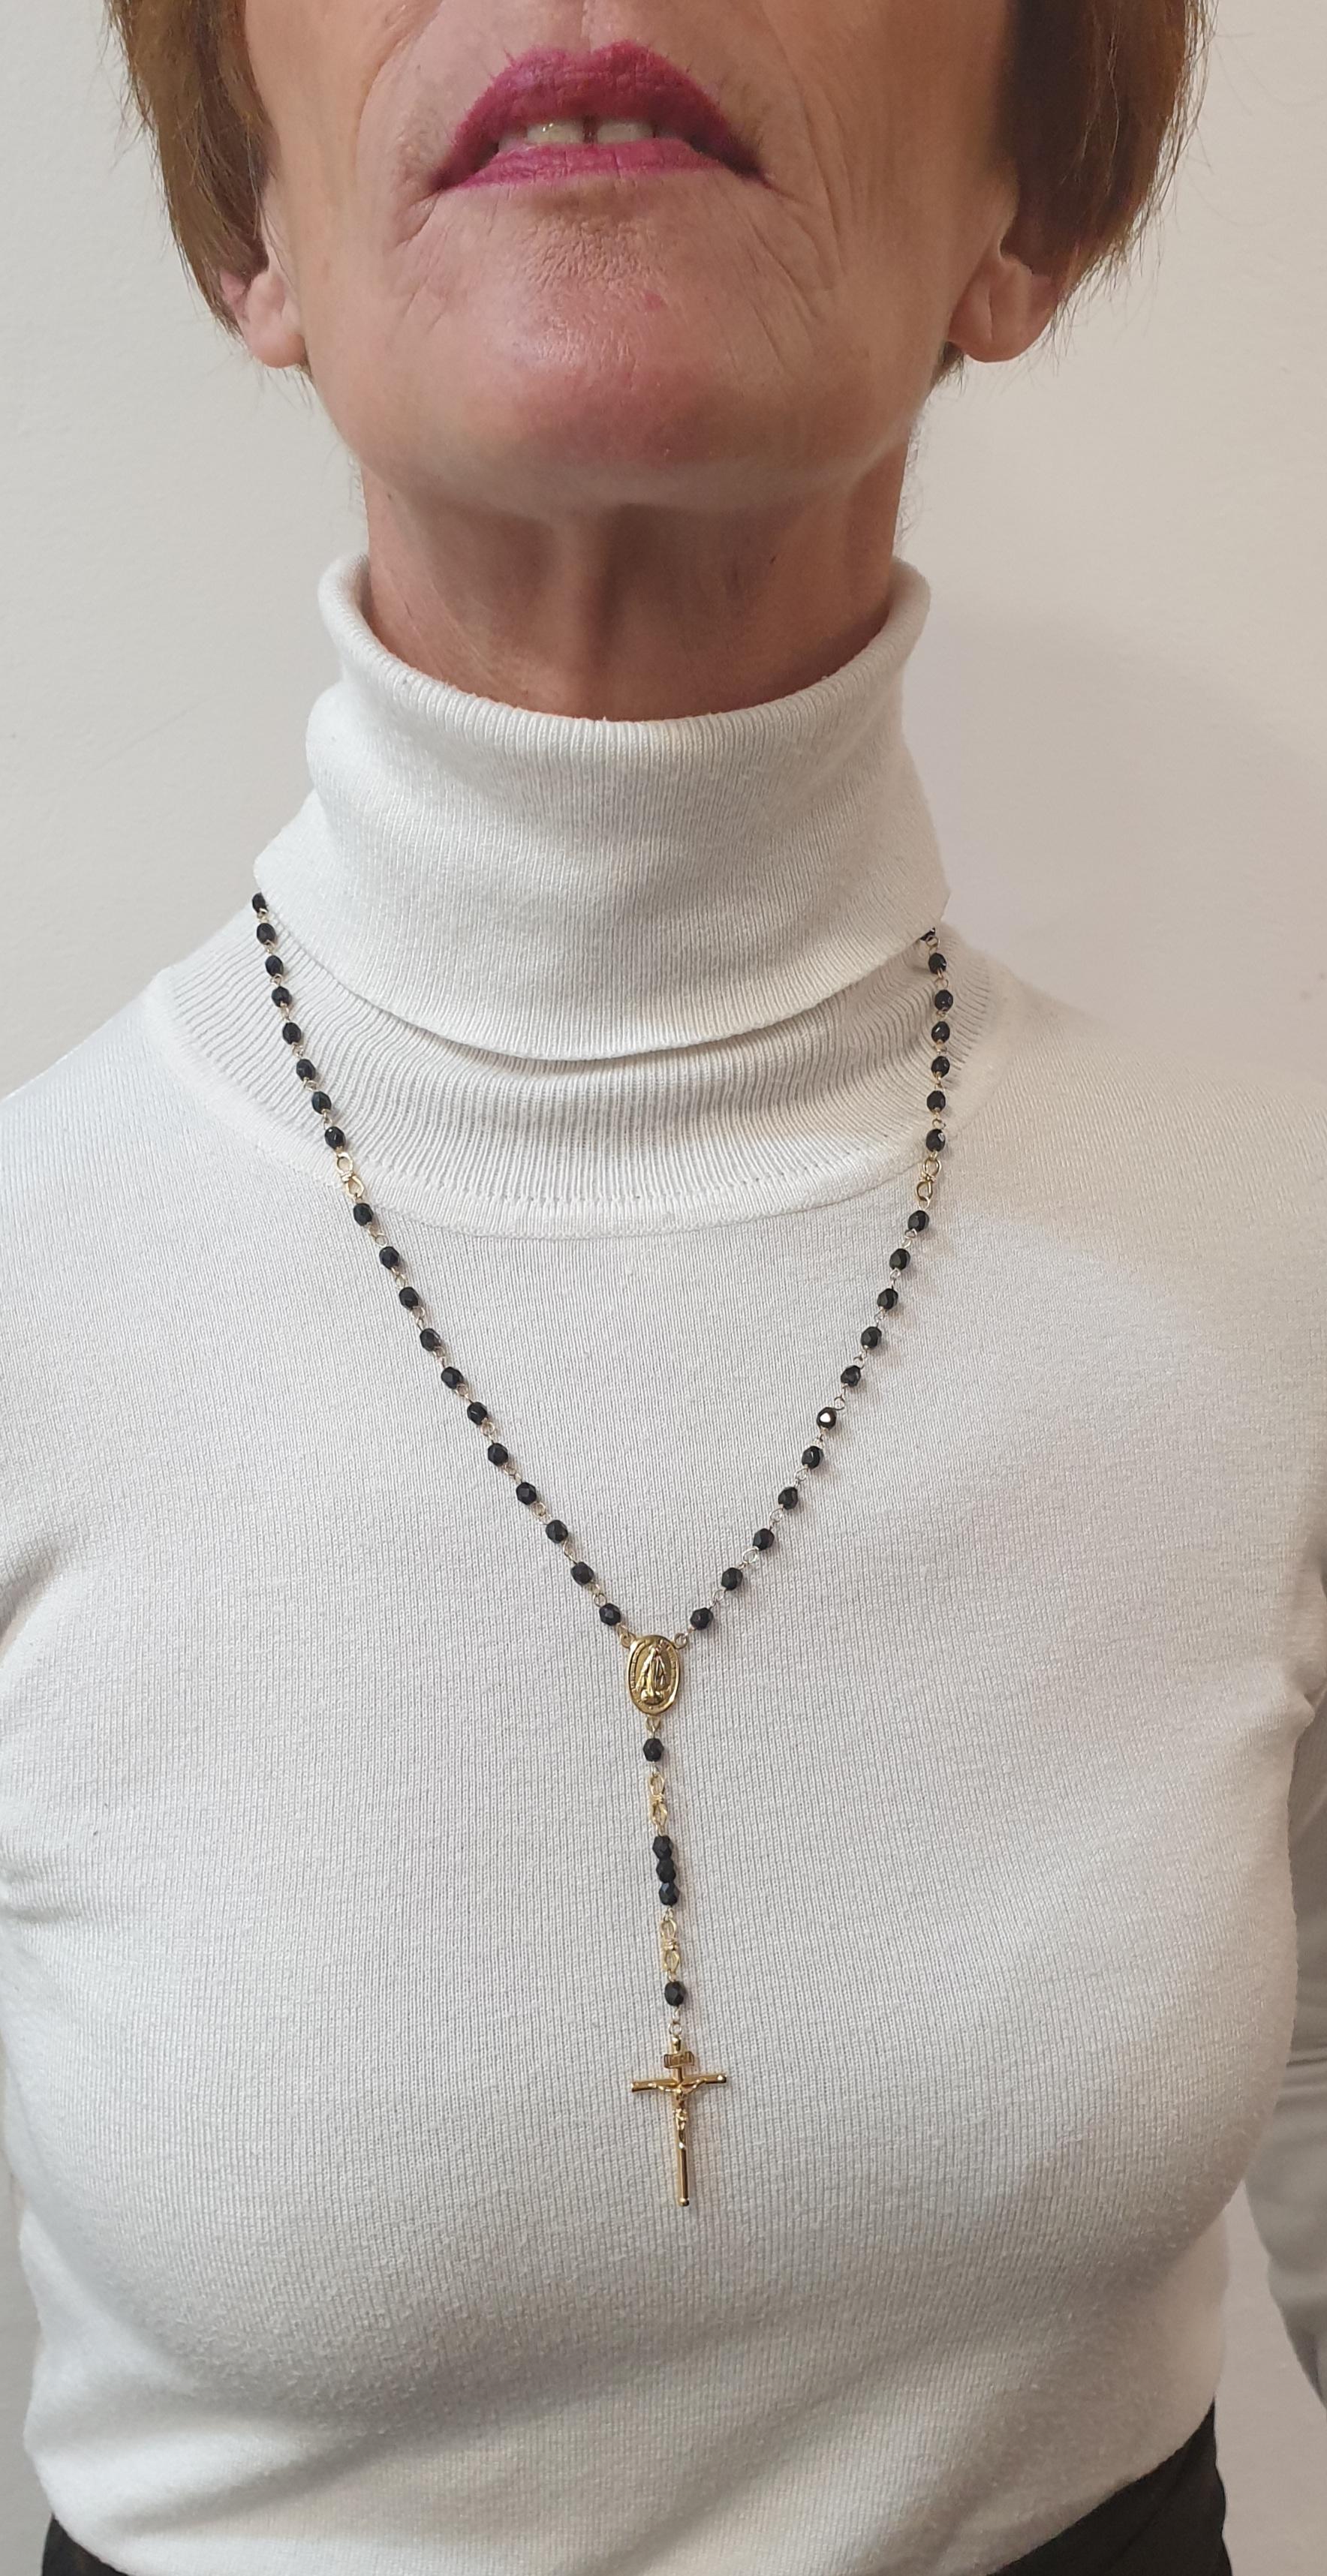 Women's or Men's Rosary Necklace in 18k Gold and Onyx